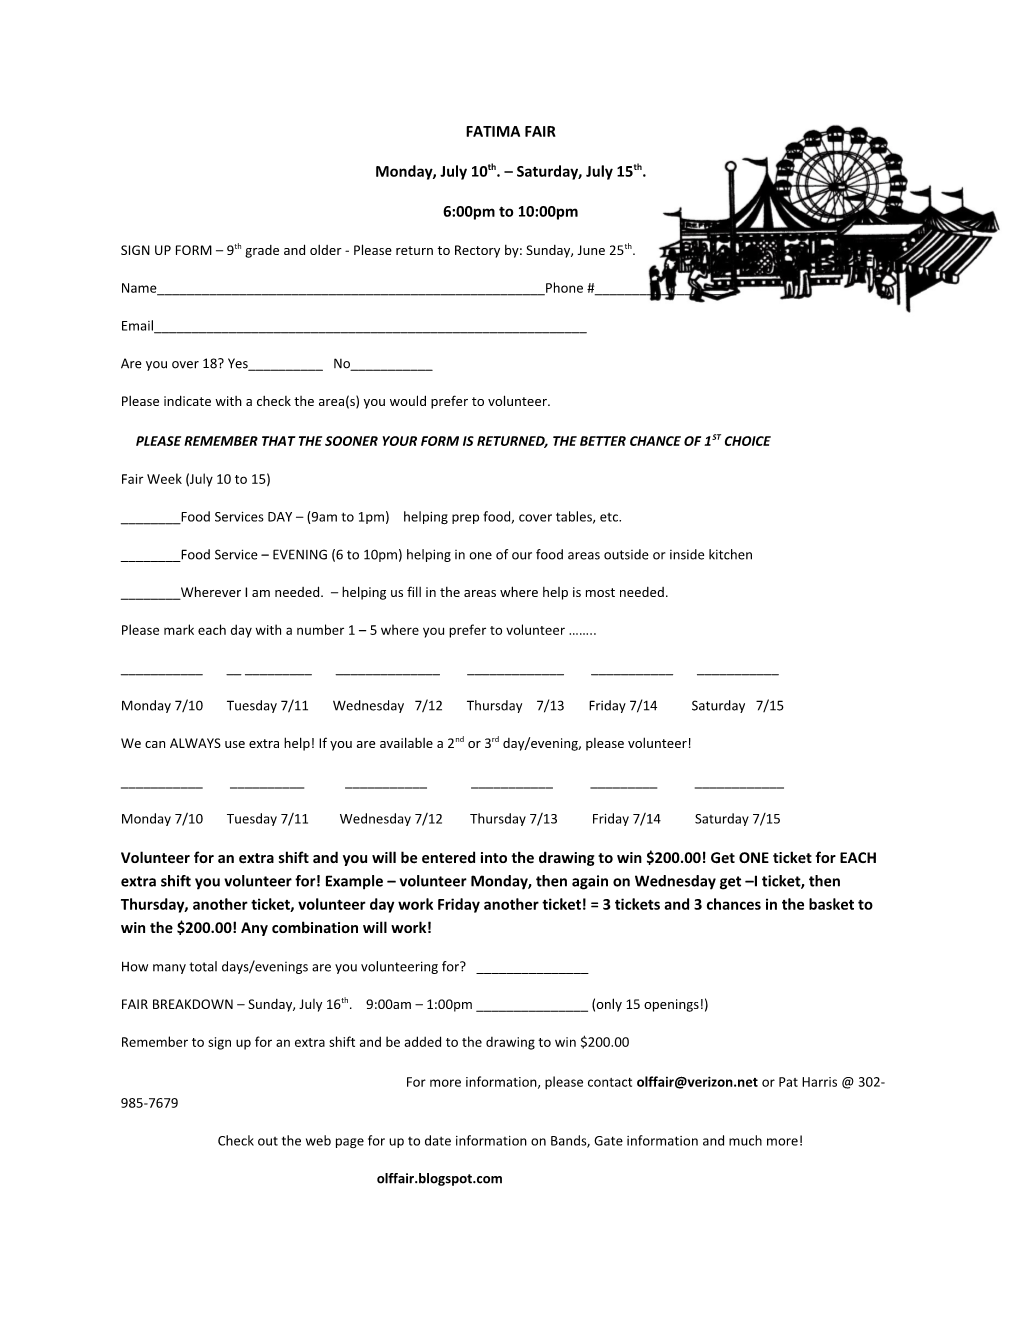 SIGN up FORM 9Th Grade and Older - Please Return to Rectory By: Sunday, June 25Th